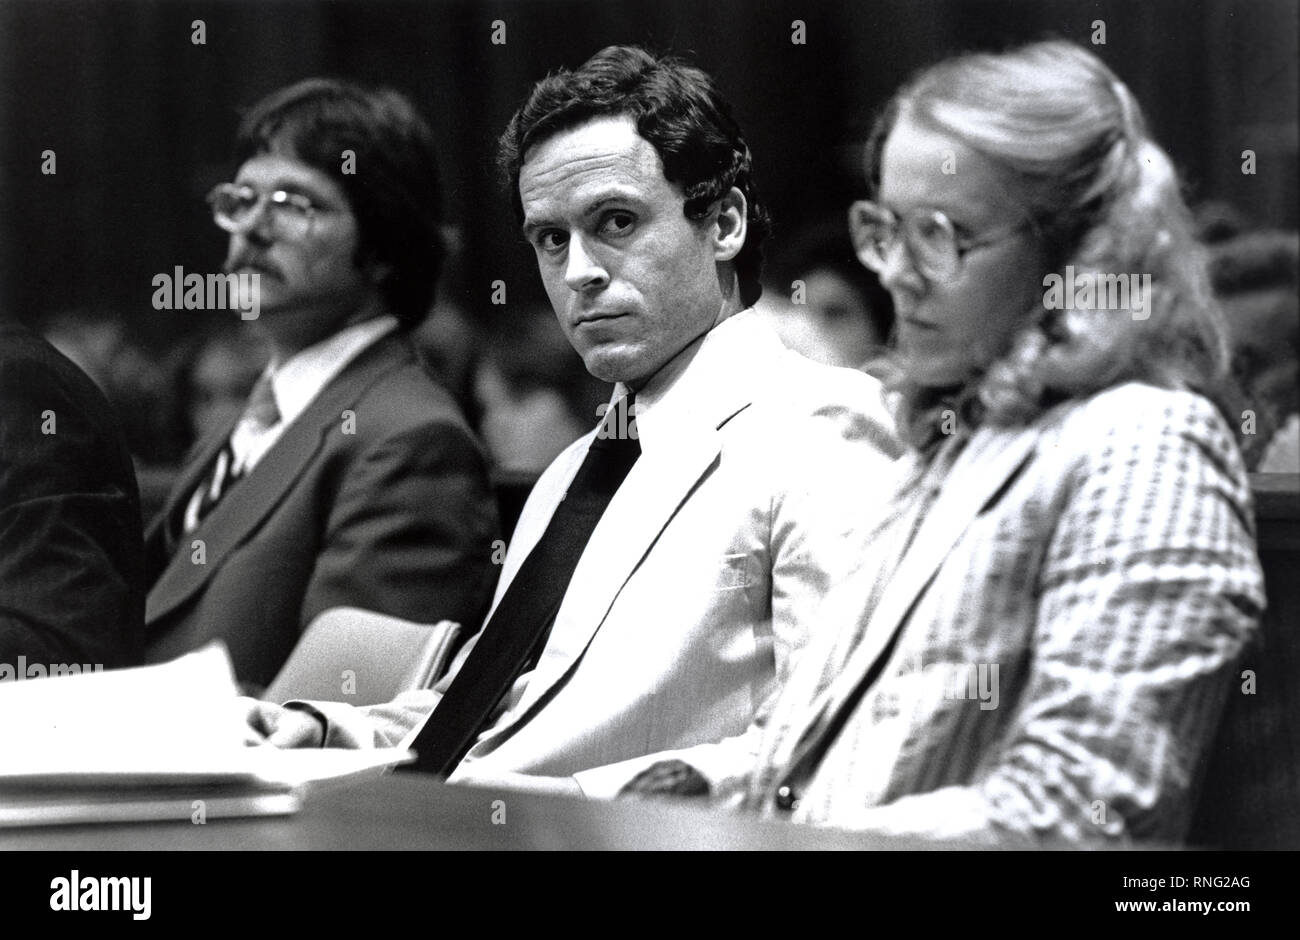 Ted Bundy Murder Trial - Miami - Ted Bundy with defense attorney Margaret Good at the defense table. Theodore Robert Bundy was an American serial killer, kidnapper, rapist, burglar, and necrophile who assaulted and murdered numerous young women and girls during the 1970s and possibly earlier. After more than a decade of denials, he confessed to 30 homicides that he committed in seven states between 1974 and 1978. Stock Photo